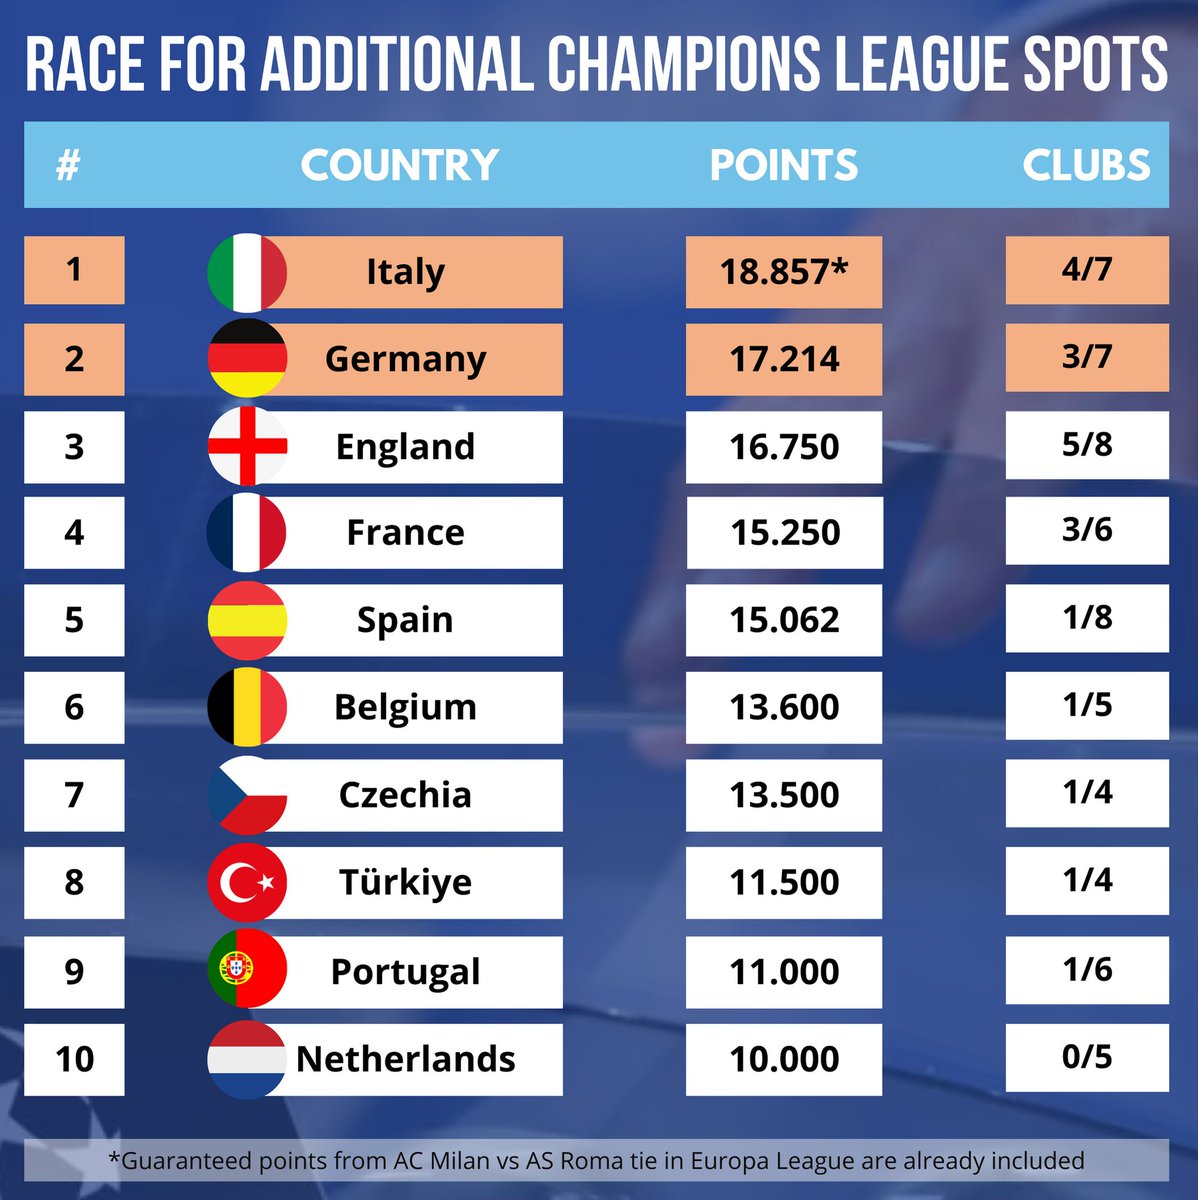 Race for extra Champions League spot: - Bayern Munich vs Arsenal wide open - Man City in danger of being eliminated! 🏴󠁧󠁢󠁥󠁮󠁧󠁿 England can add max of +1.375 pts 🇩🇪 Germany can add max of +0.428 pts 🇮🇹 Italy can't secure Top 2 spot tonight